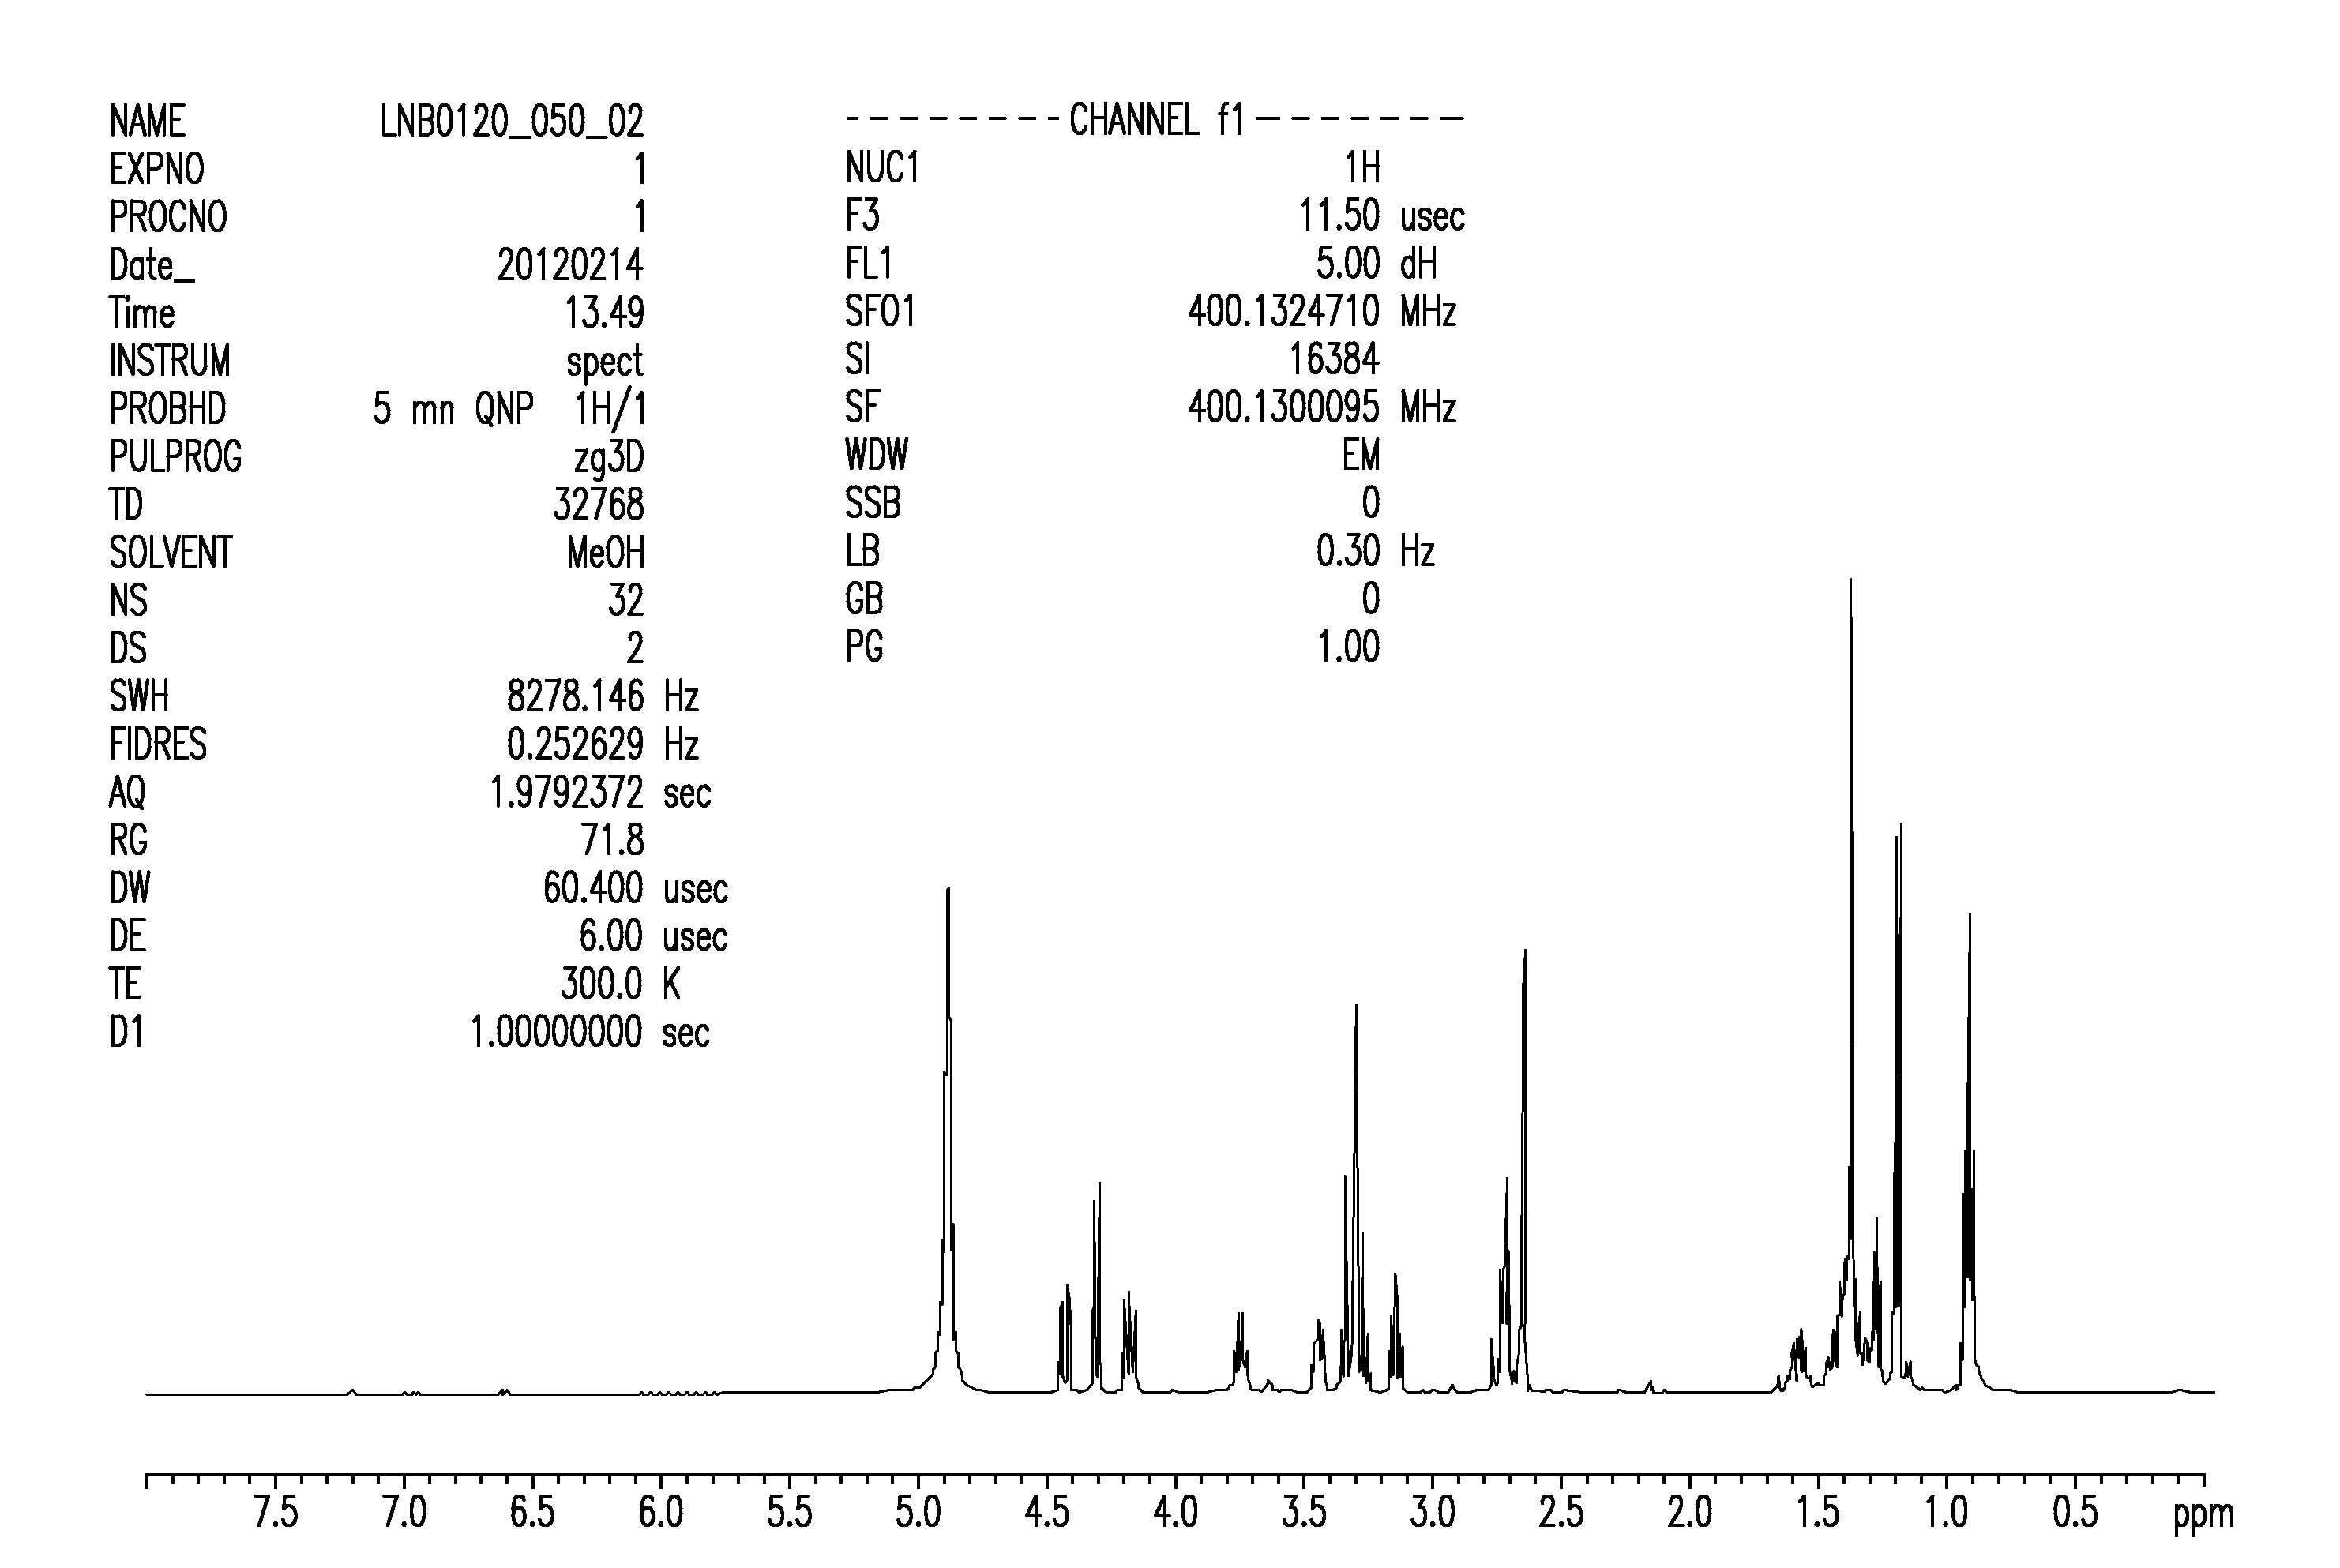 Flavor composition containing hmg glucosides